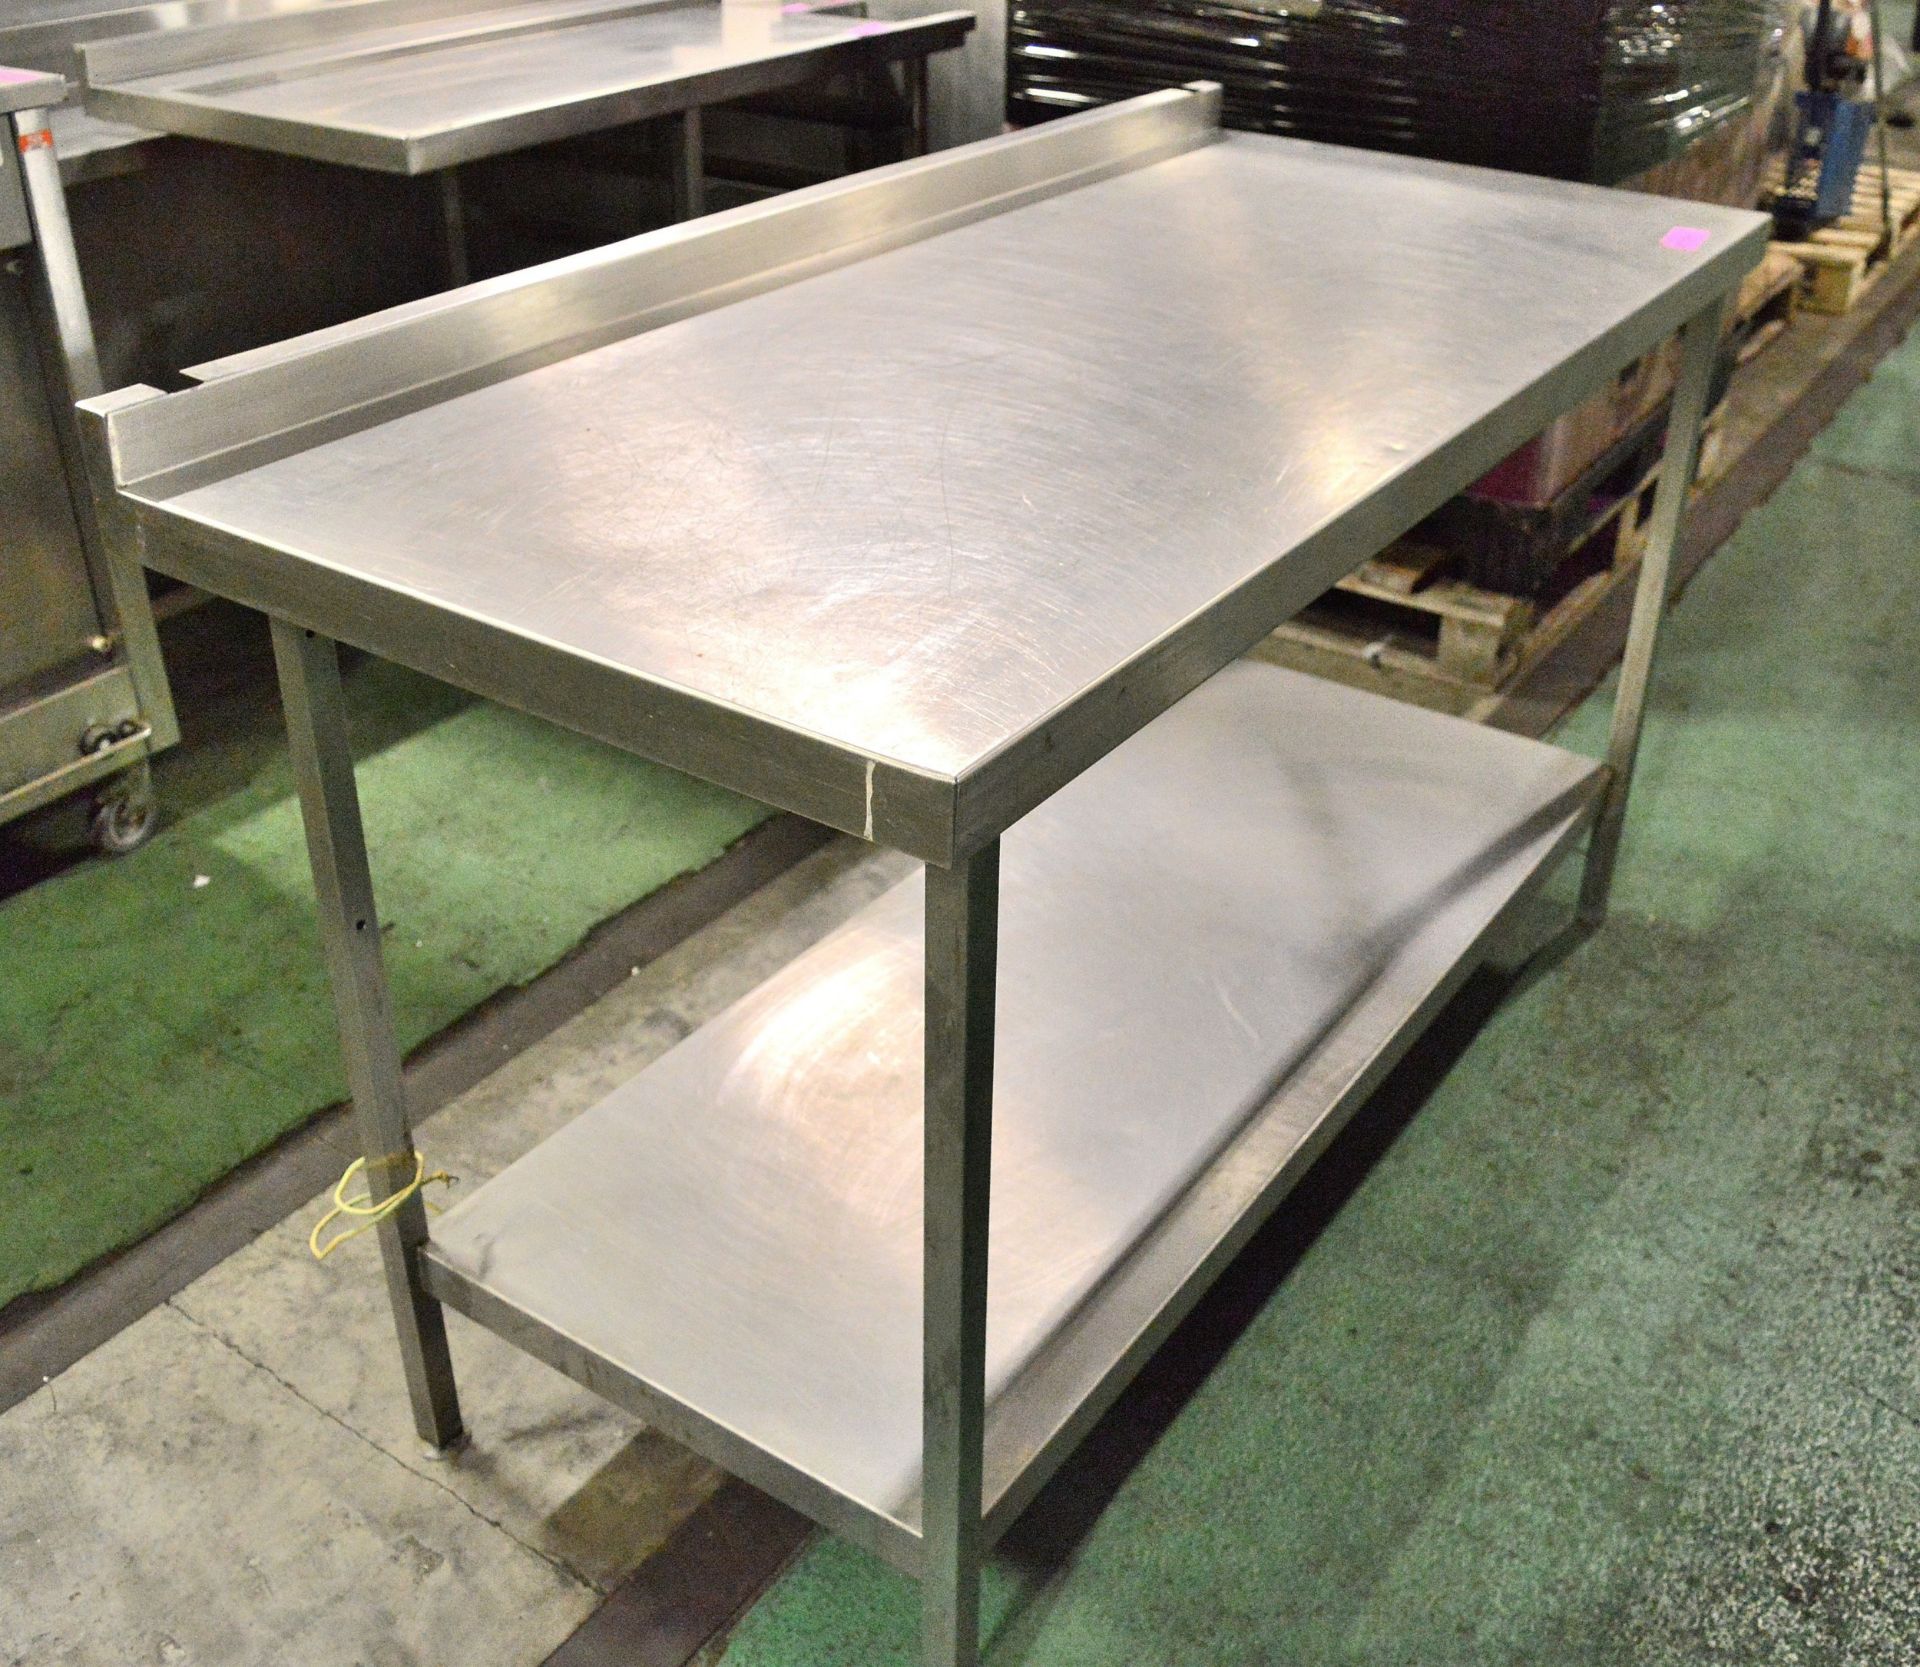 Stainless table with shelf - 1530 x 700 x 880 - Image 3 of 3